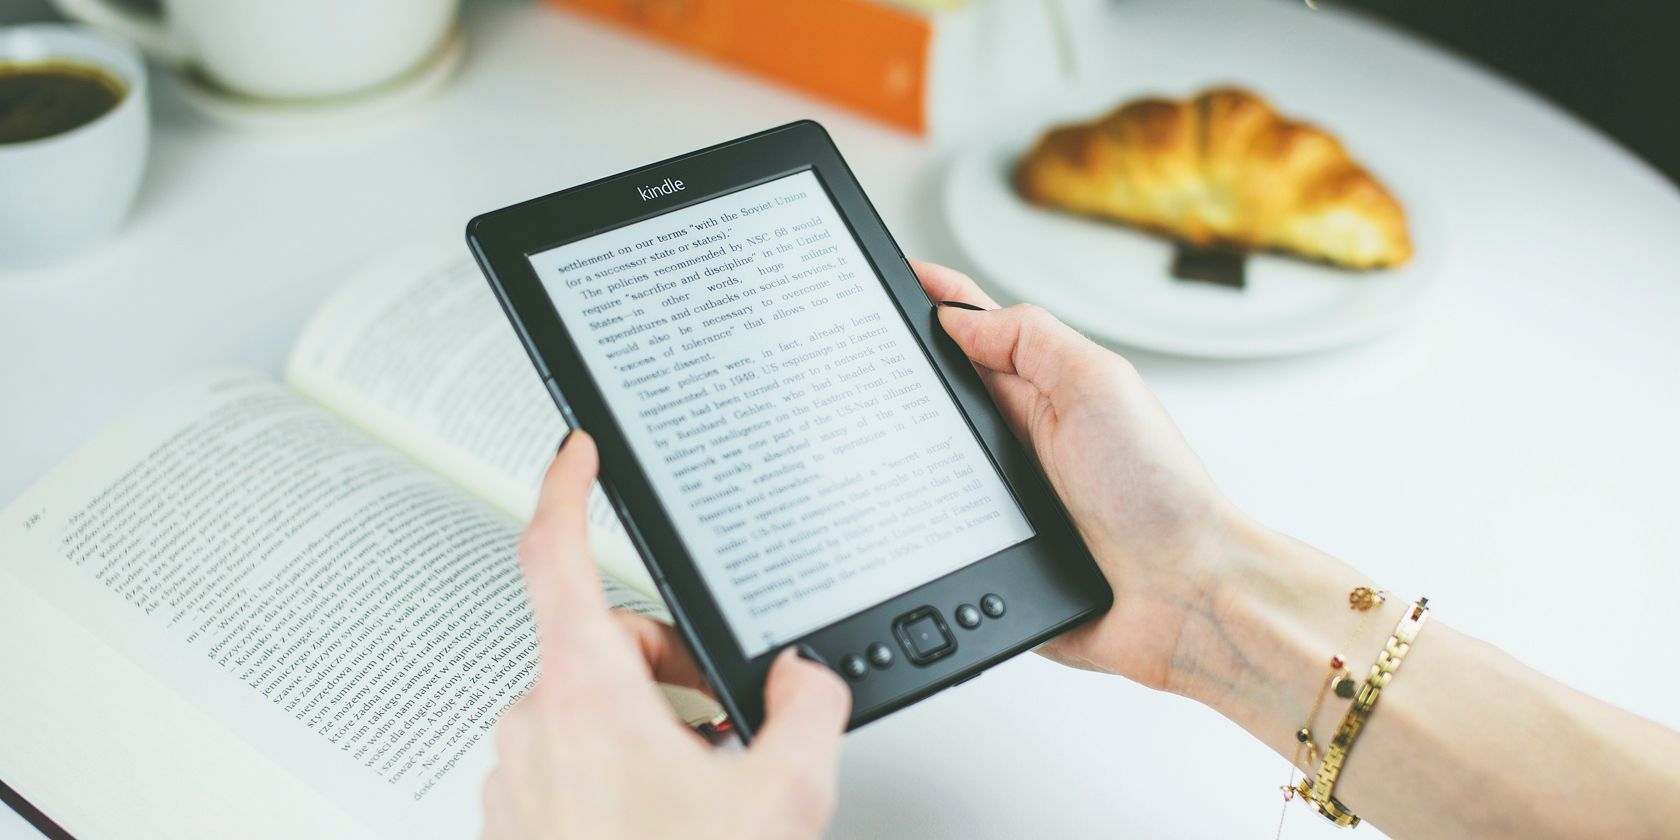 Photo of a Kindle being read by an unseen person with a book and a pastry on the table below